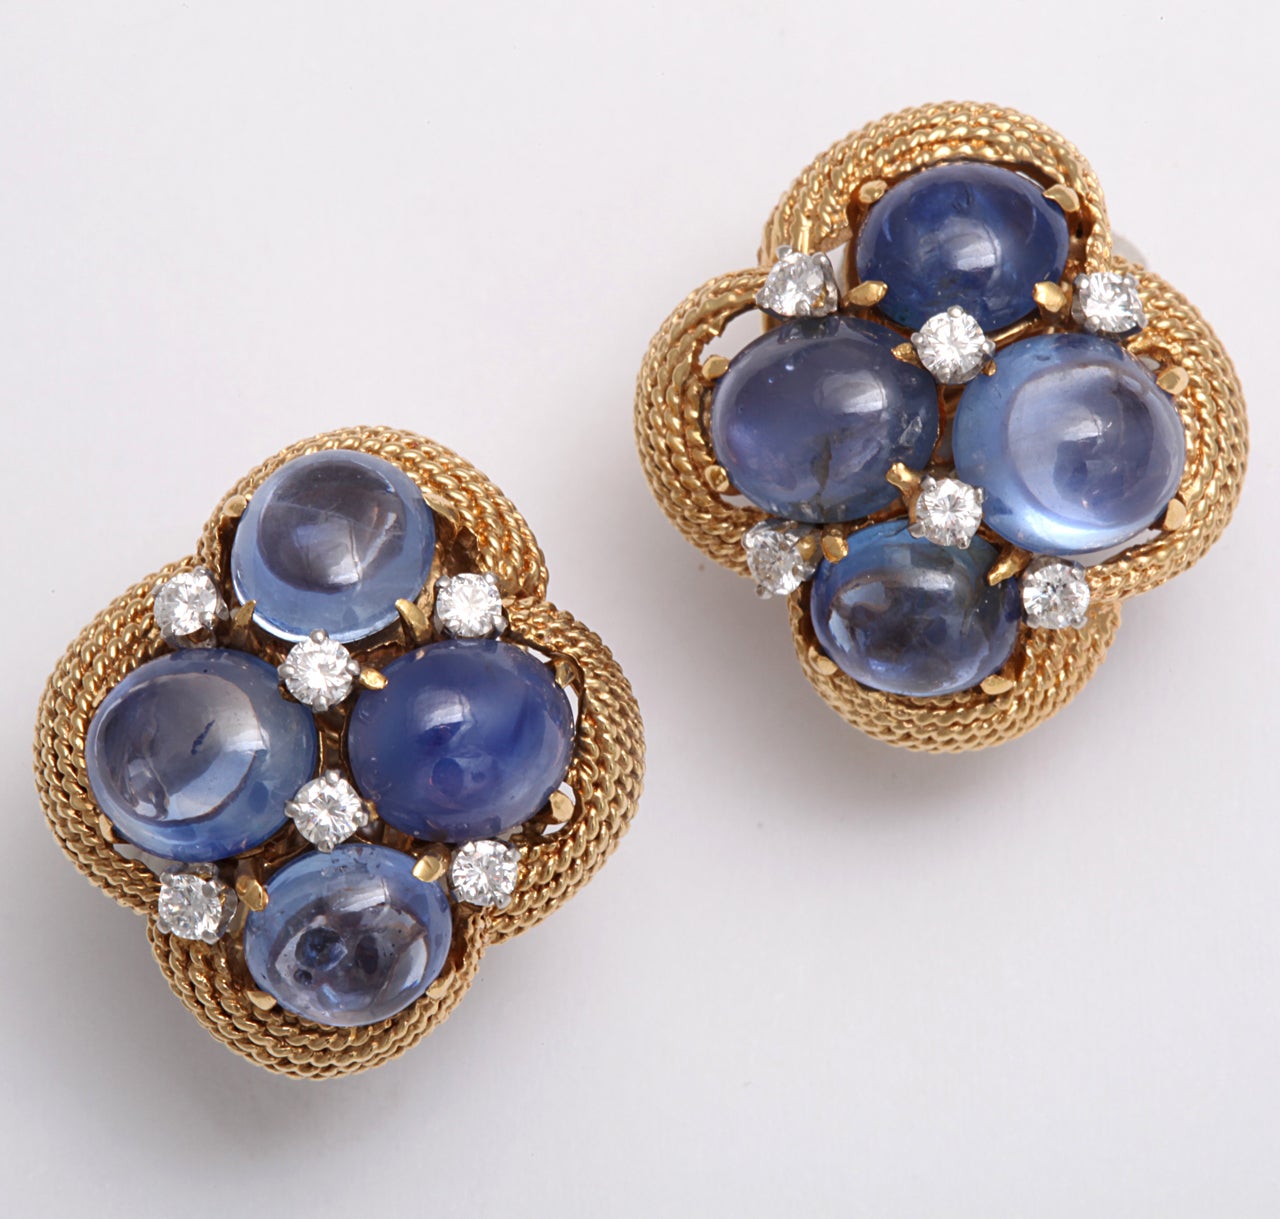 A fabulous early pair of 18 kt gold clip earrings with cabachon sapphires and diamonds surrounded by woven frame. Signed David Webb